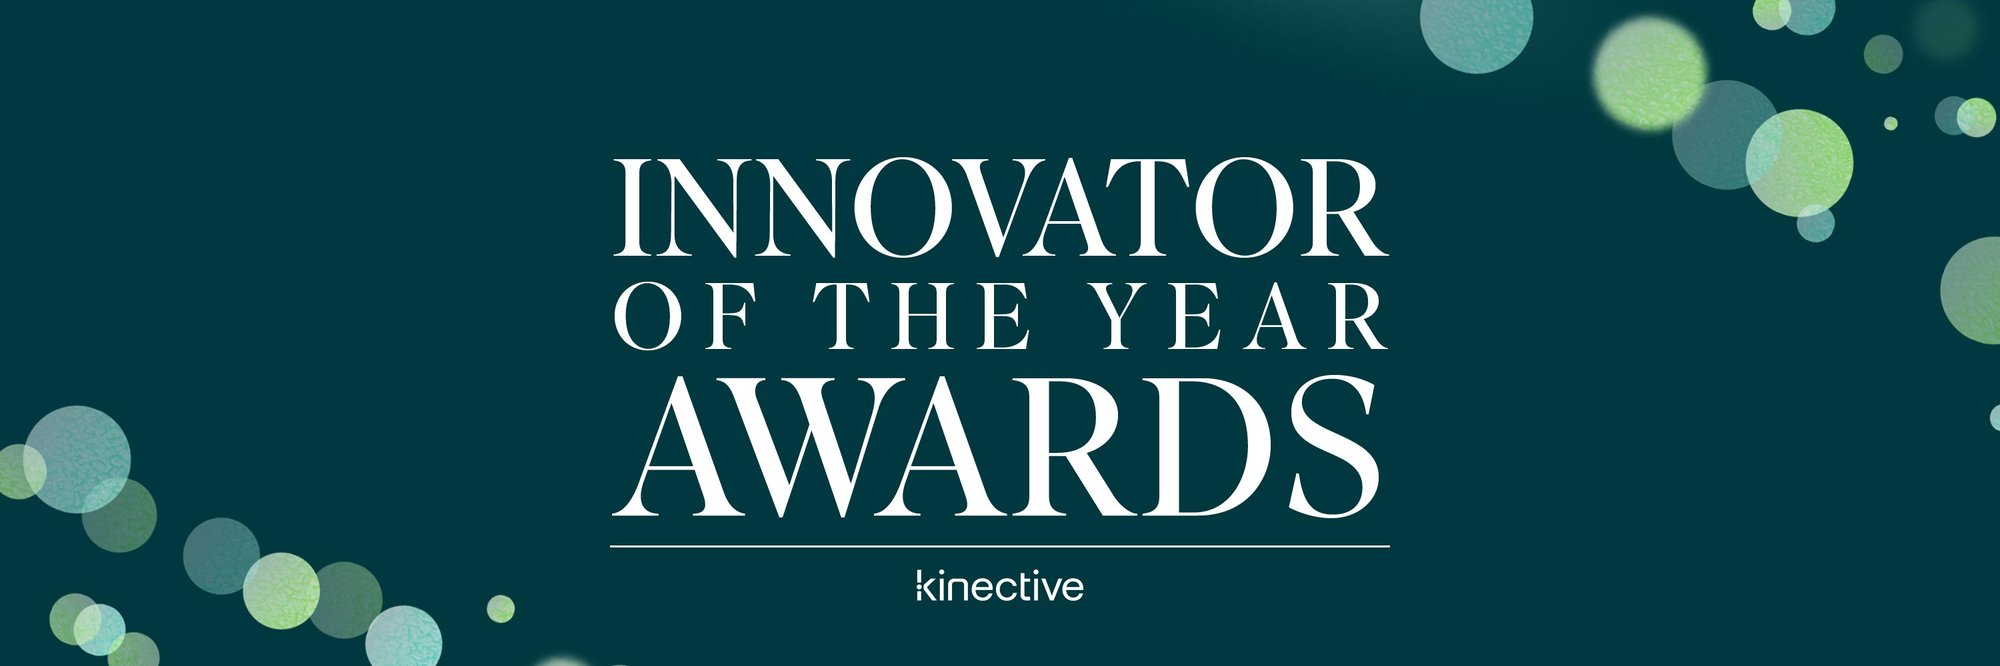 Kinective's Innovator of the Year Awards